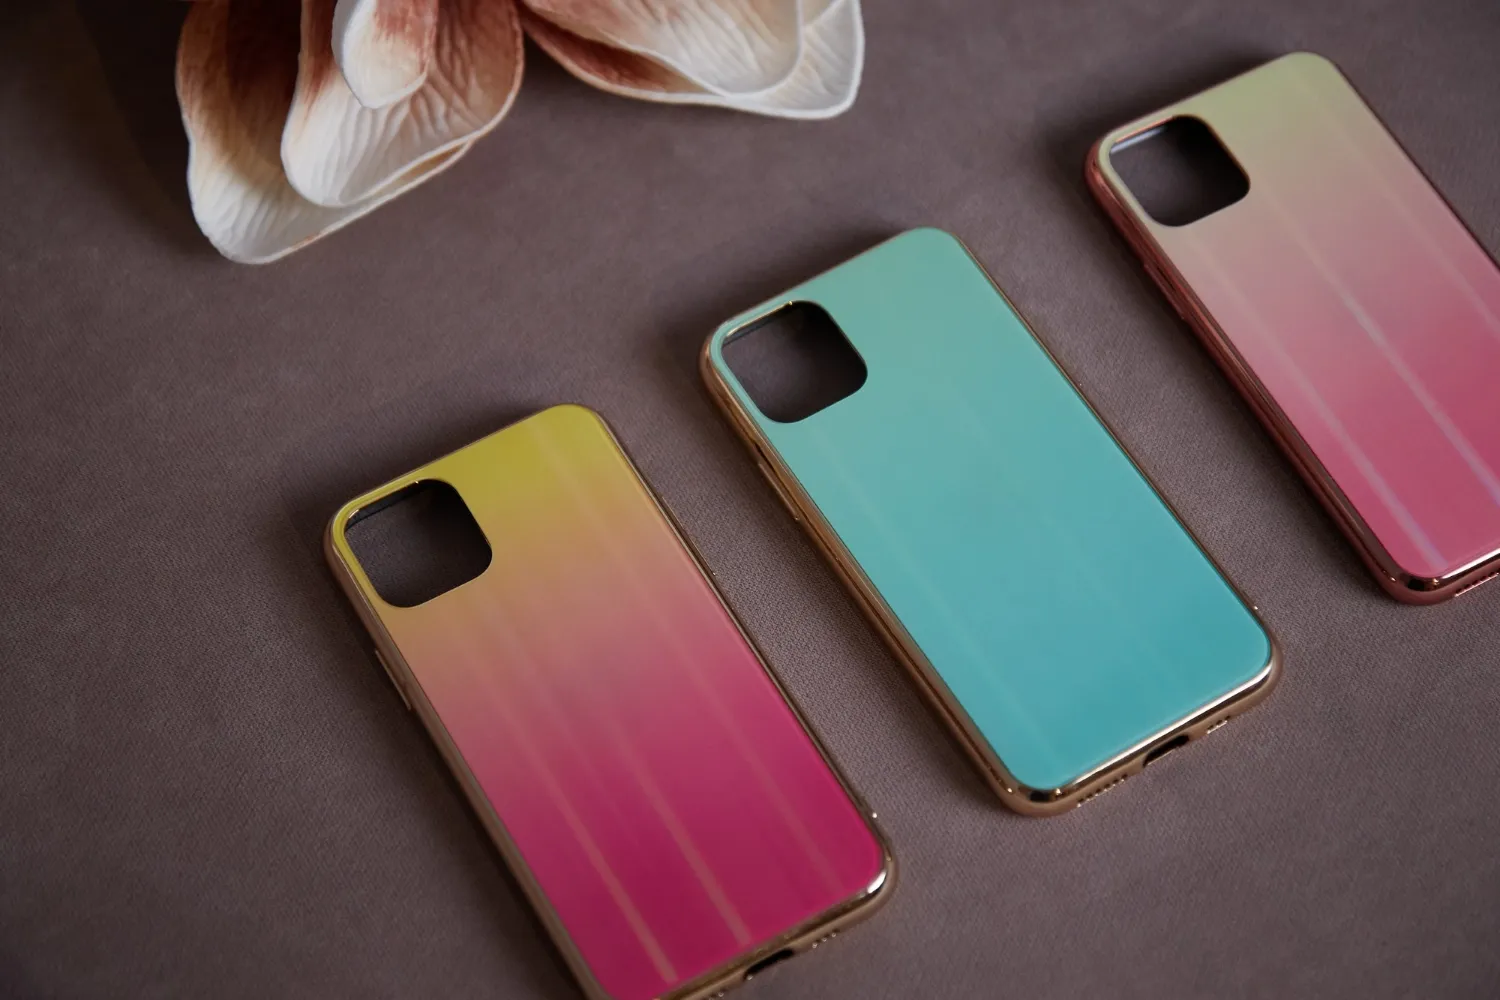 Beautiful women's mobile phone cases on the background of artificial flowers shimmer with a gradient shine